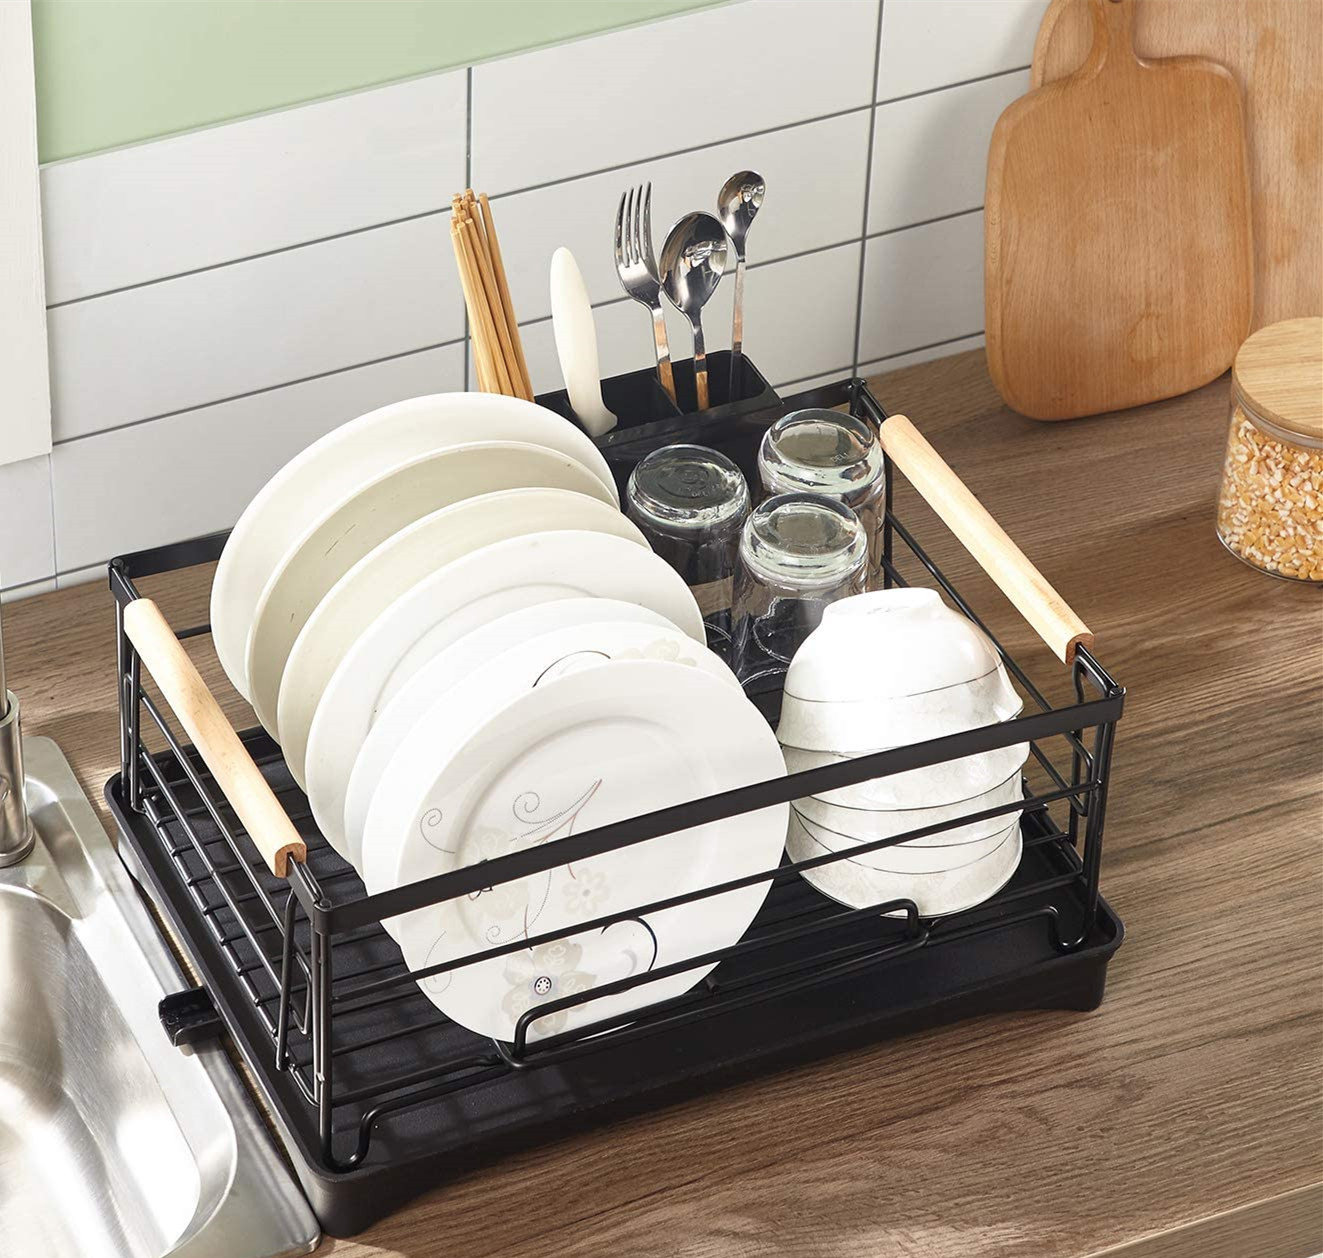 ASTER-FORM CORP Dish Drying Rack,2-Tier Dish Racks For Kitchen Counter